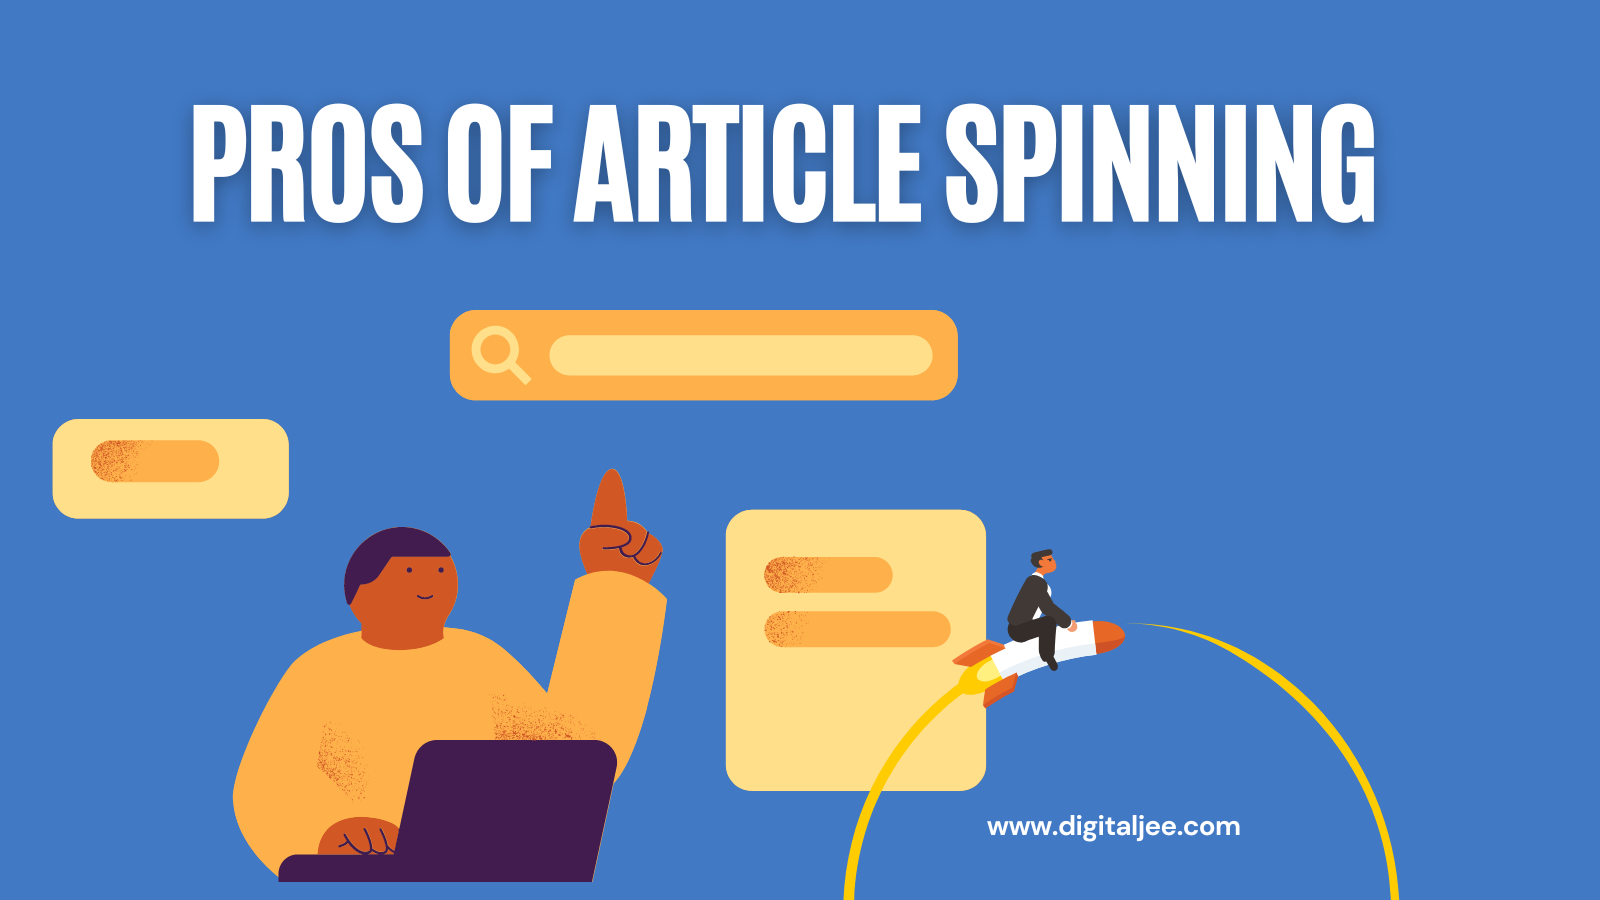 Pros of Article Spinning